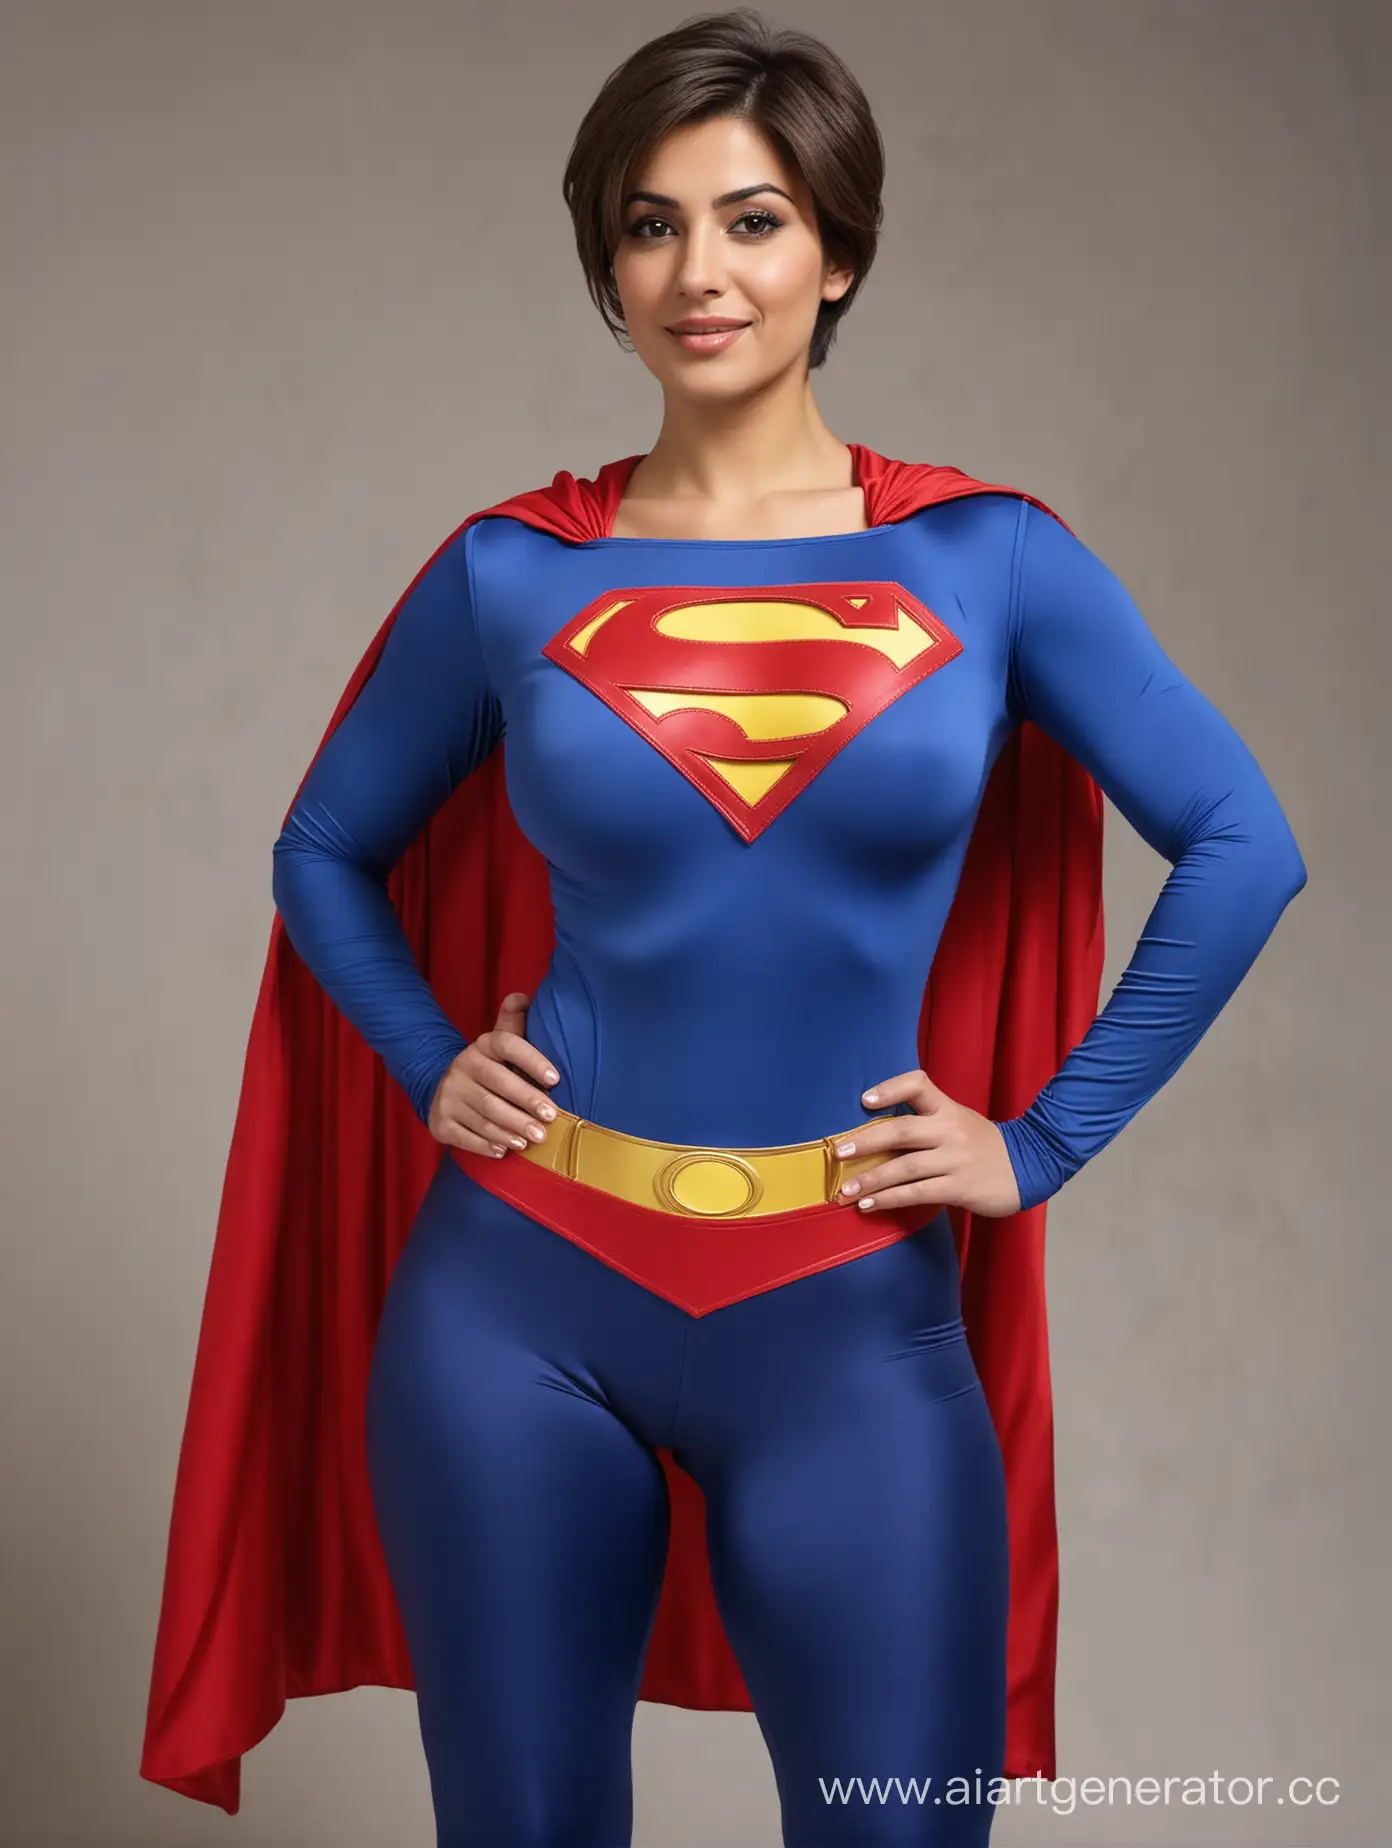 Strong-Middle-Eastern-Woman-Flexing-Enormous-Super-Muscles-in-Superman-Costume